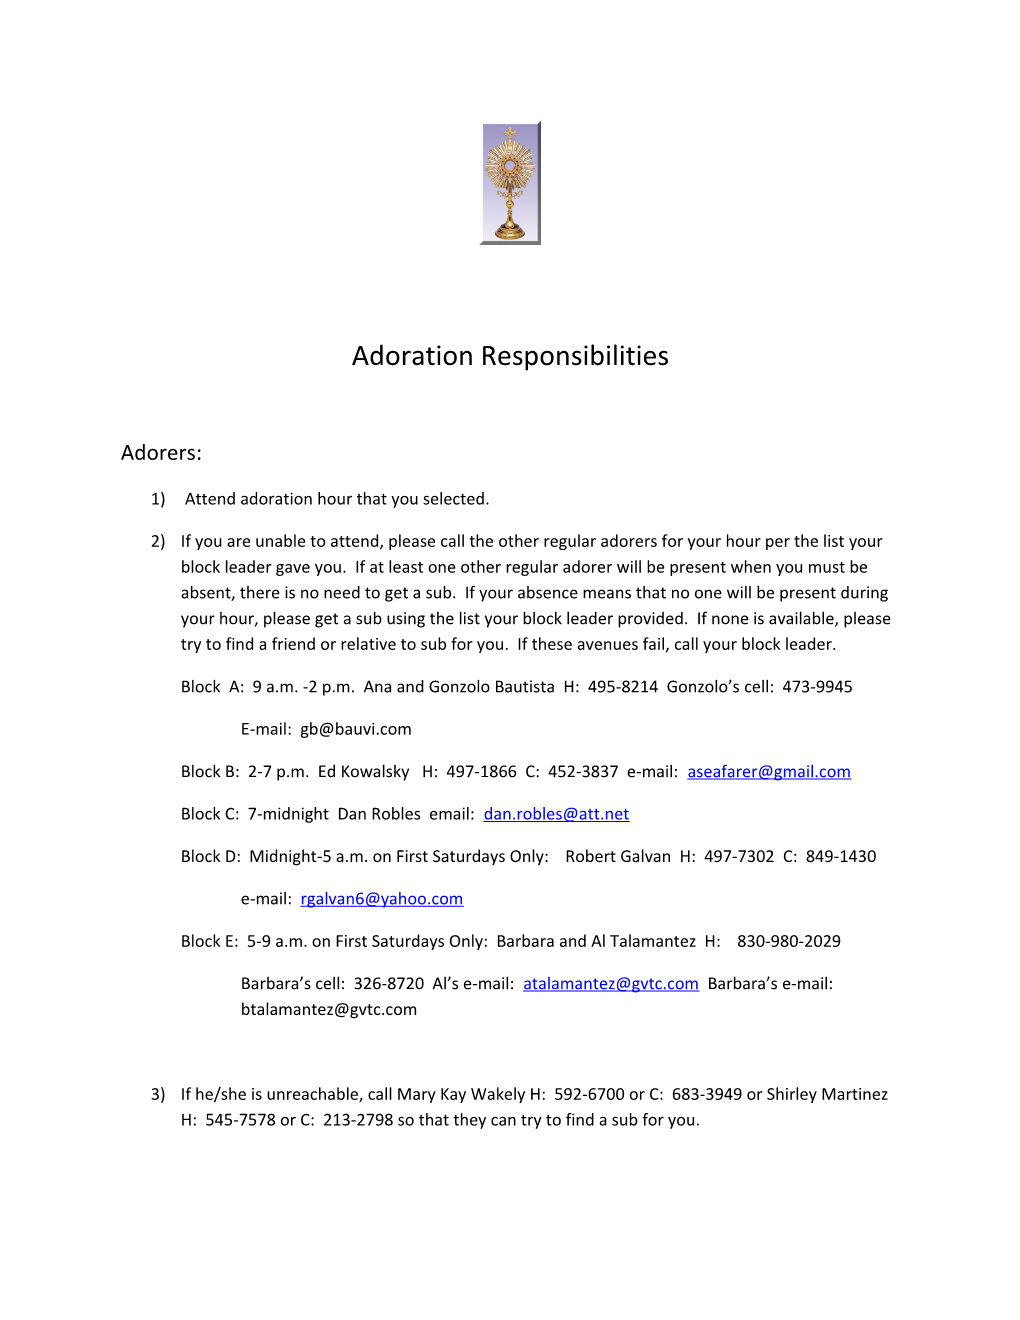 1) Attend Adoration Hour That You Selected